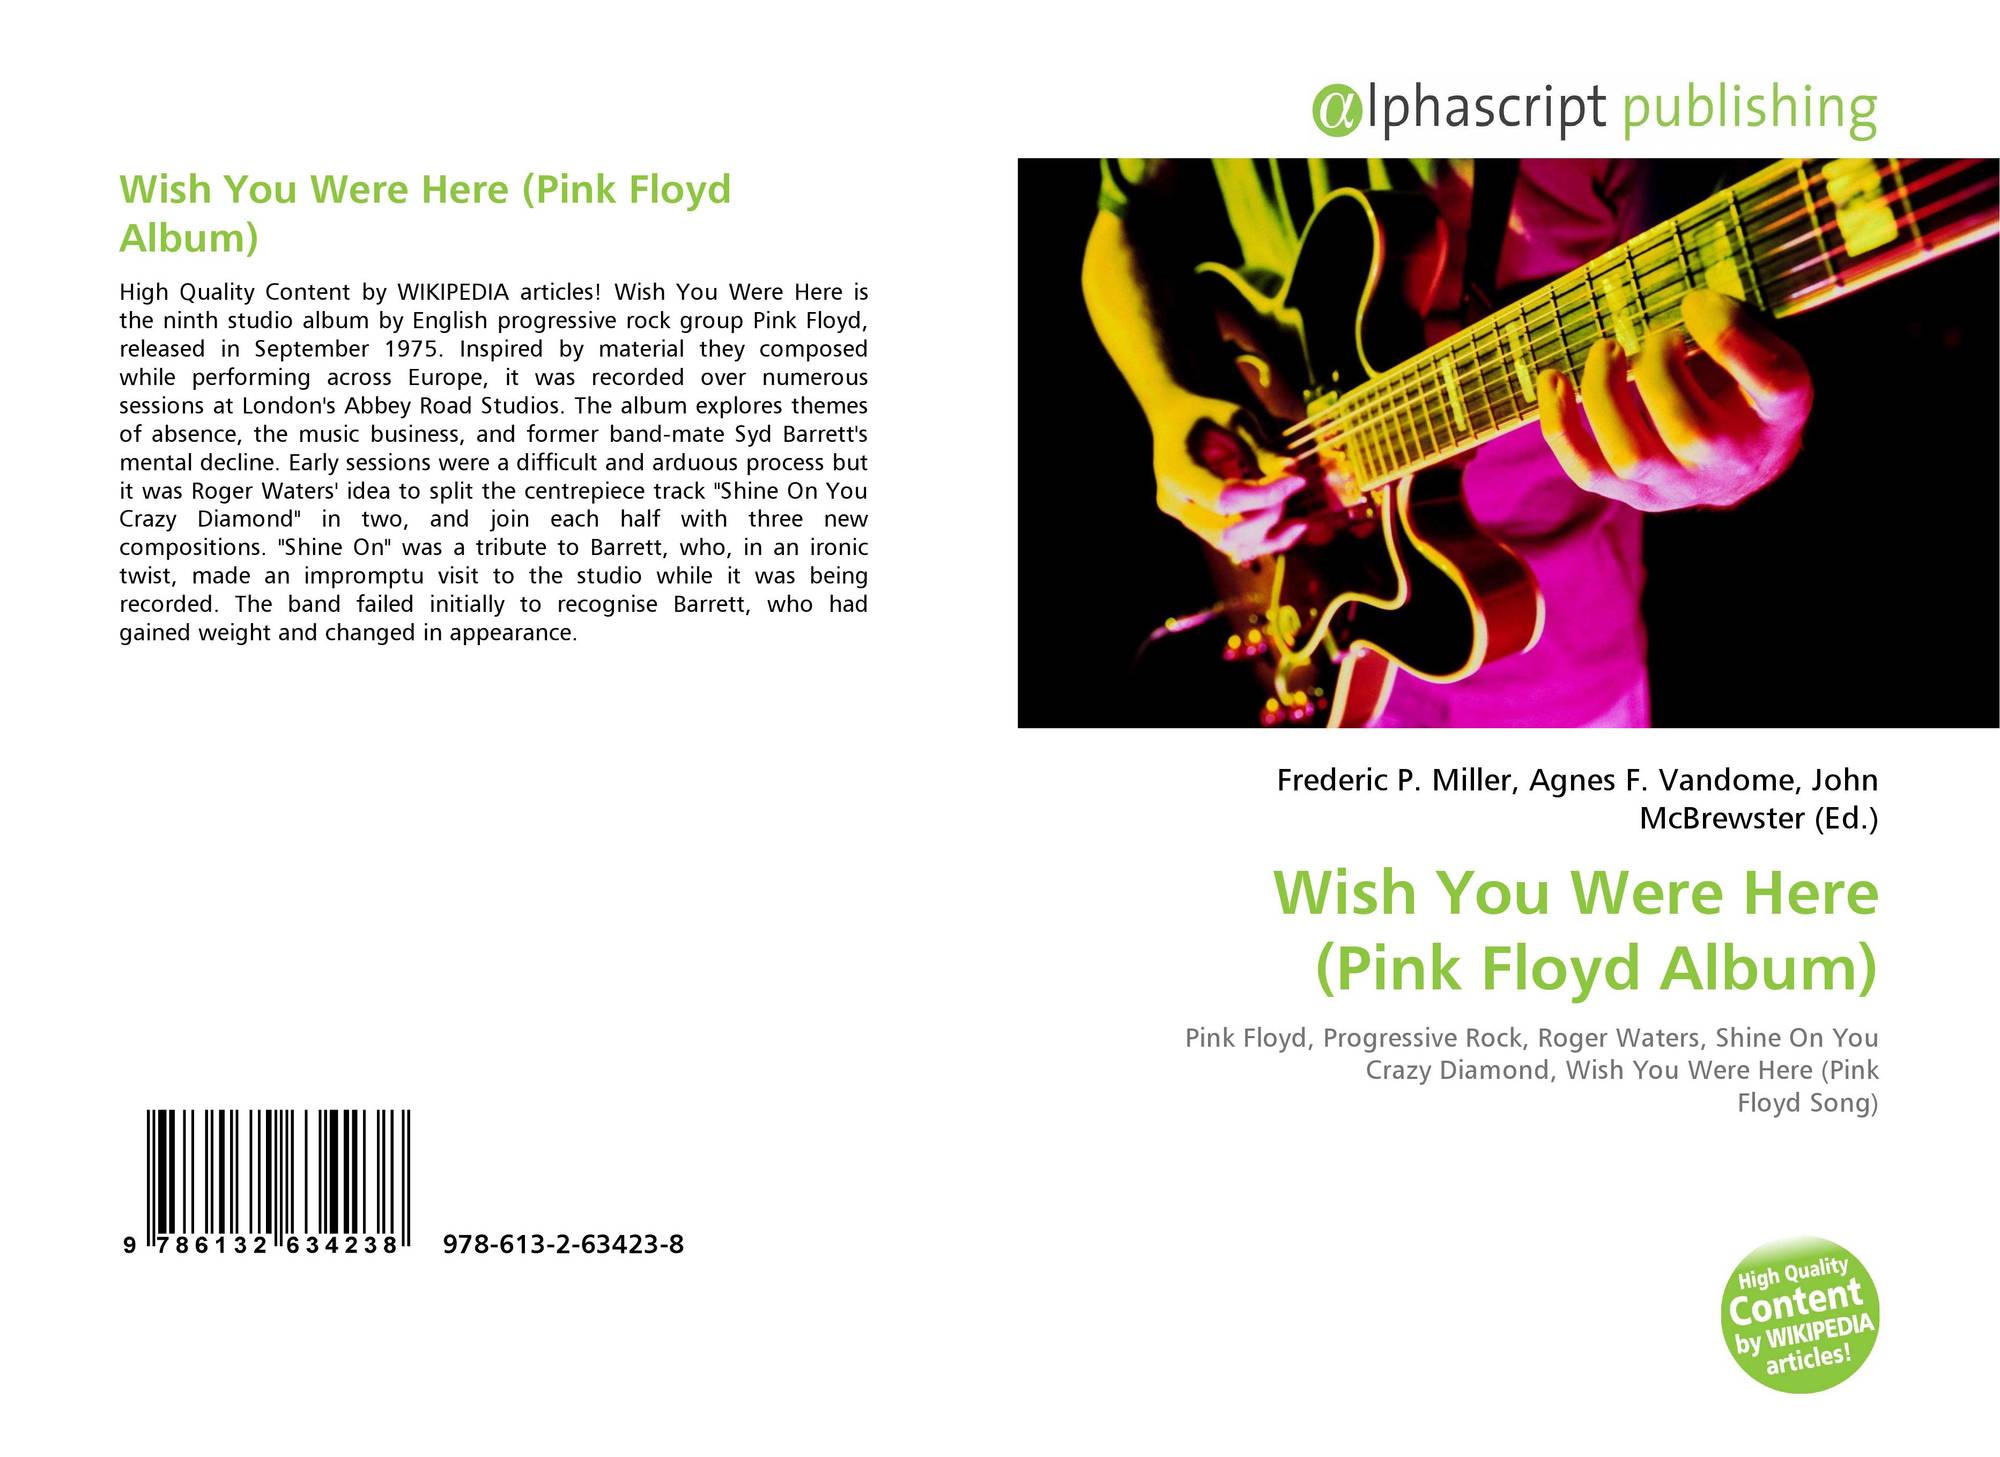 Wish You Were Here by Leslie Simon